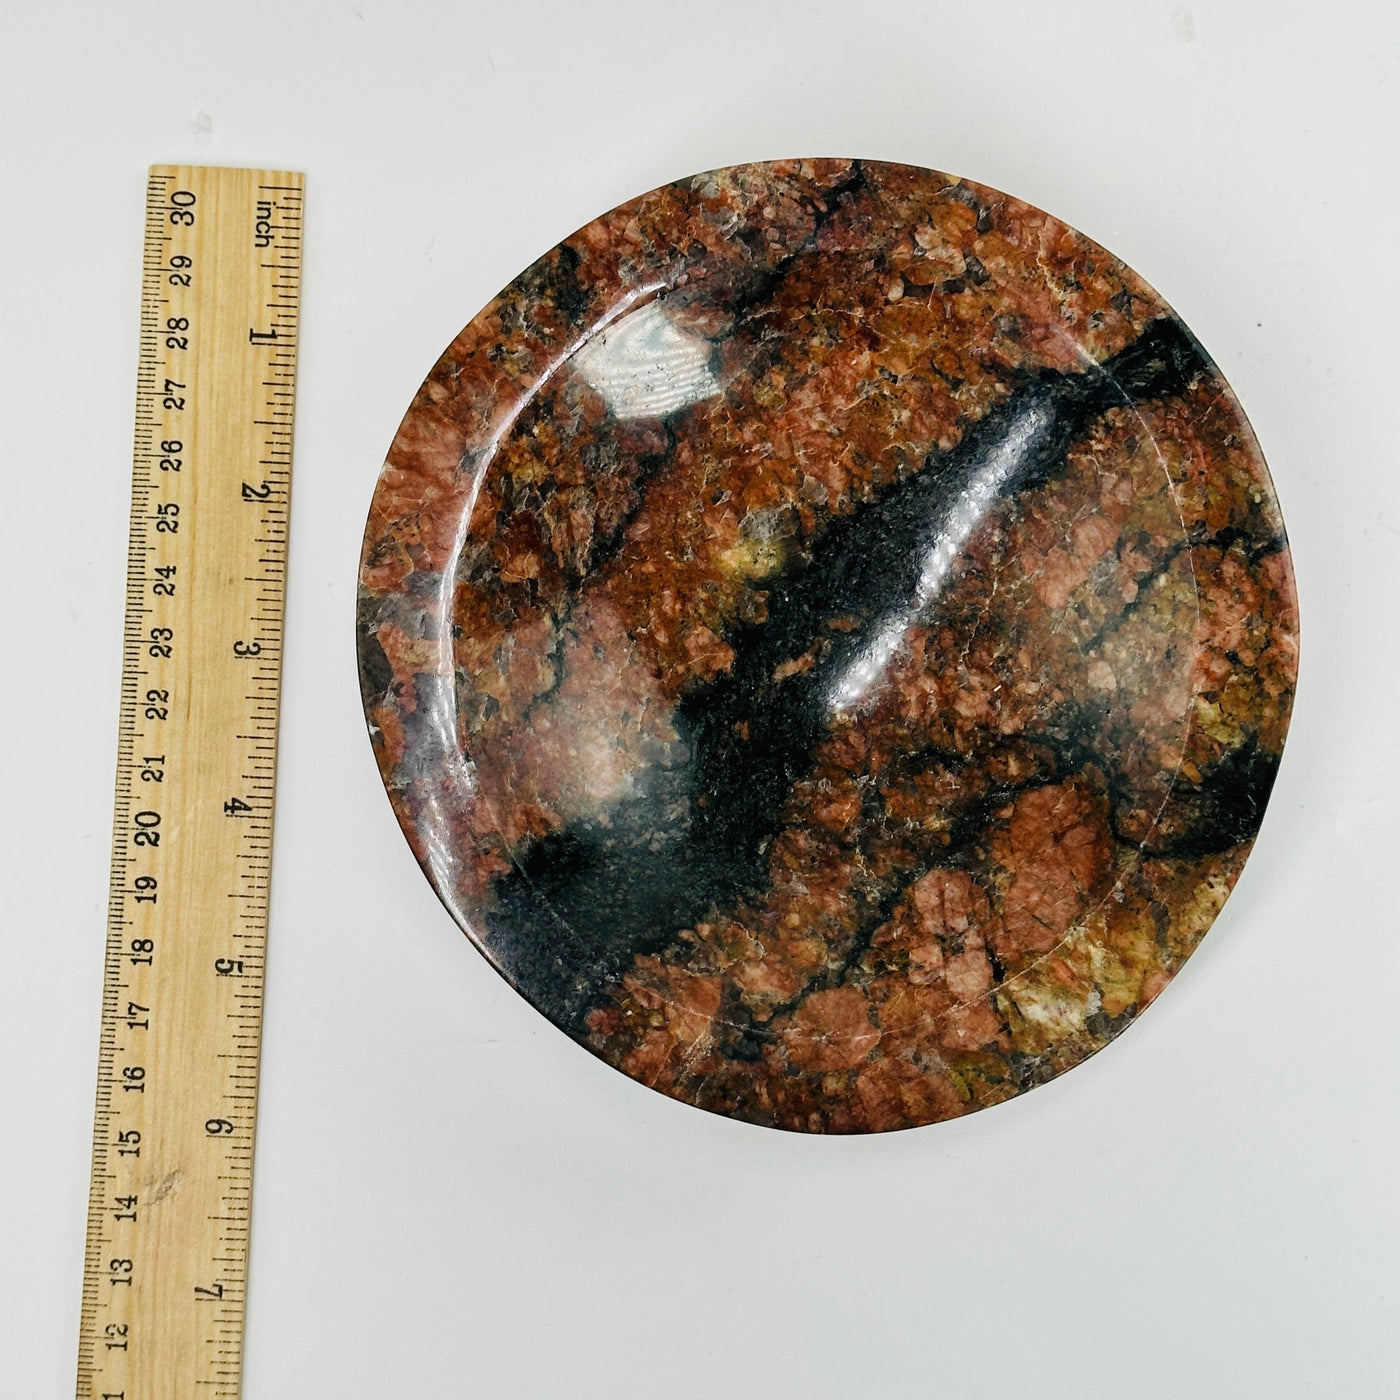 feldspar and tourmaline bowl next to a ruler for size reference